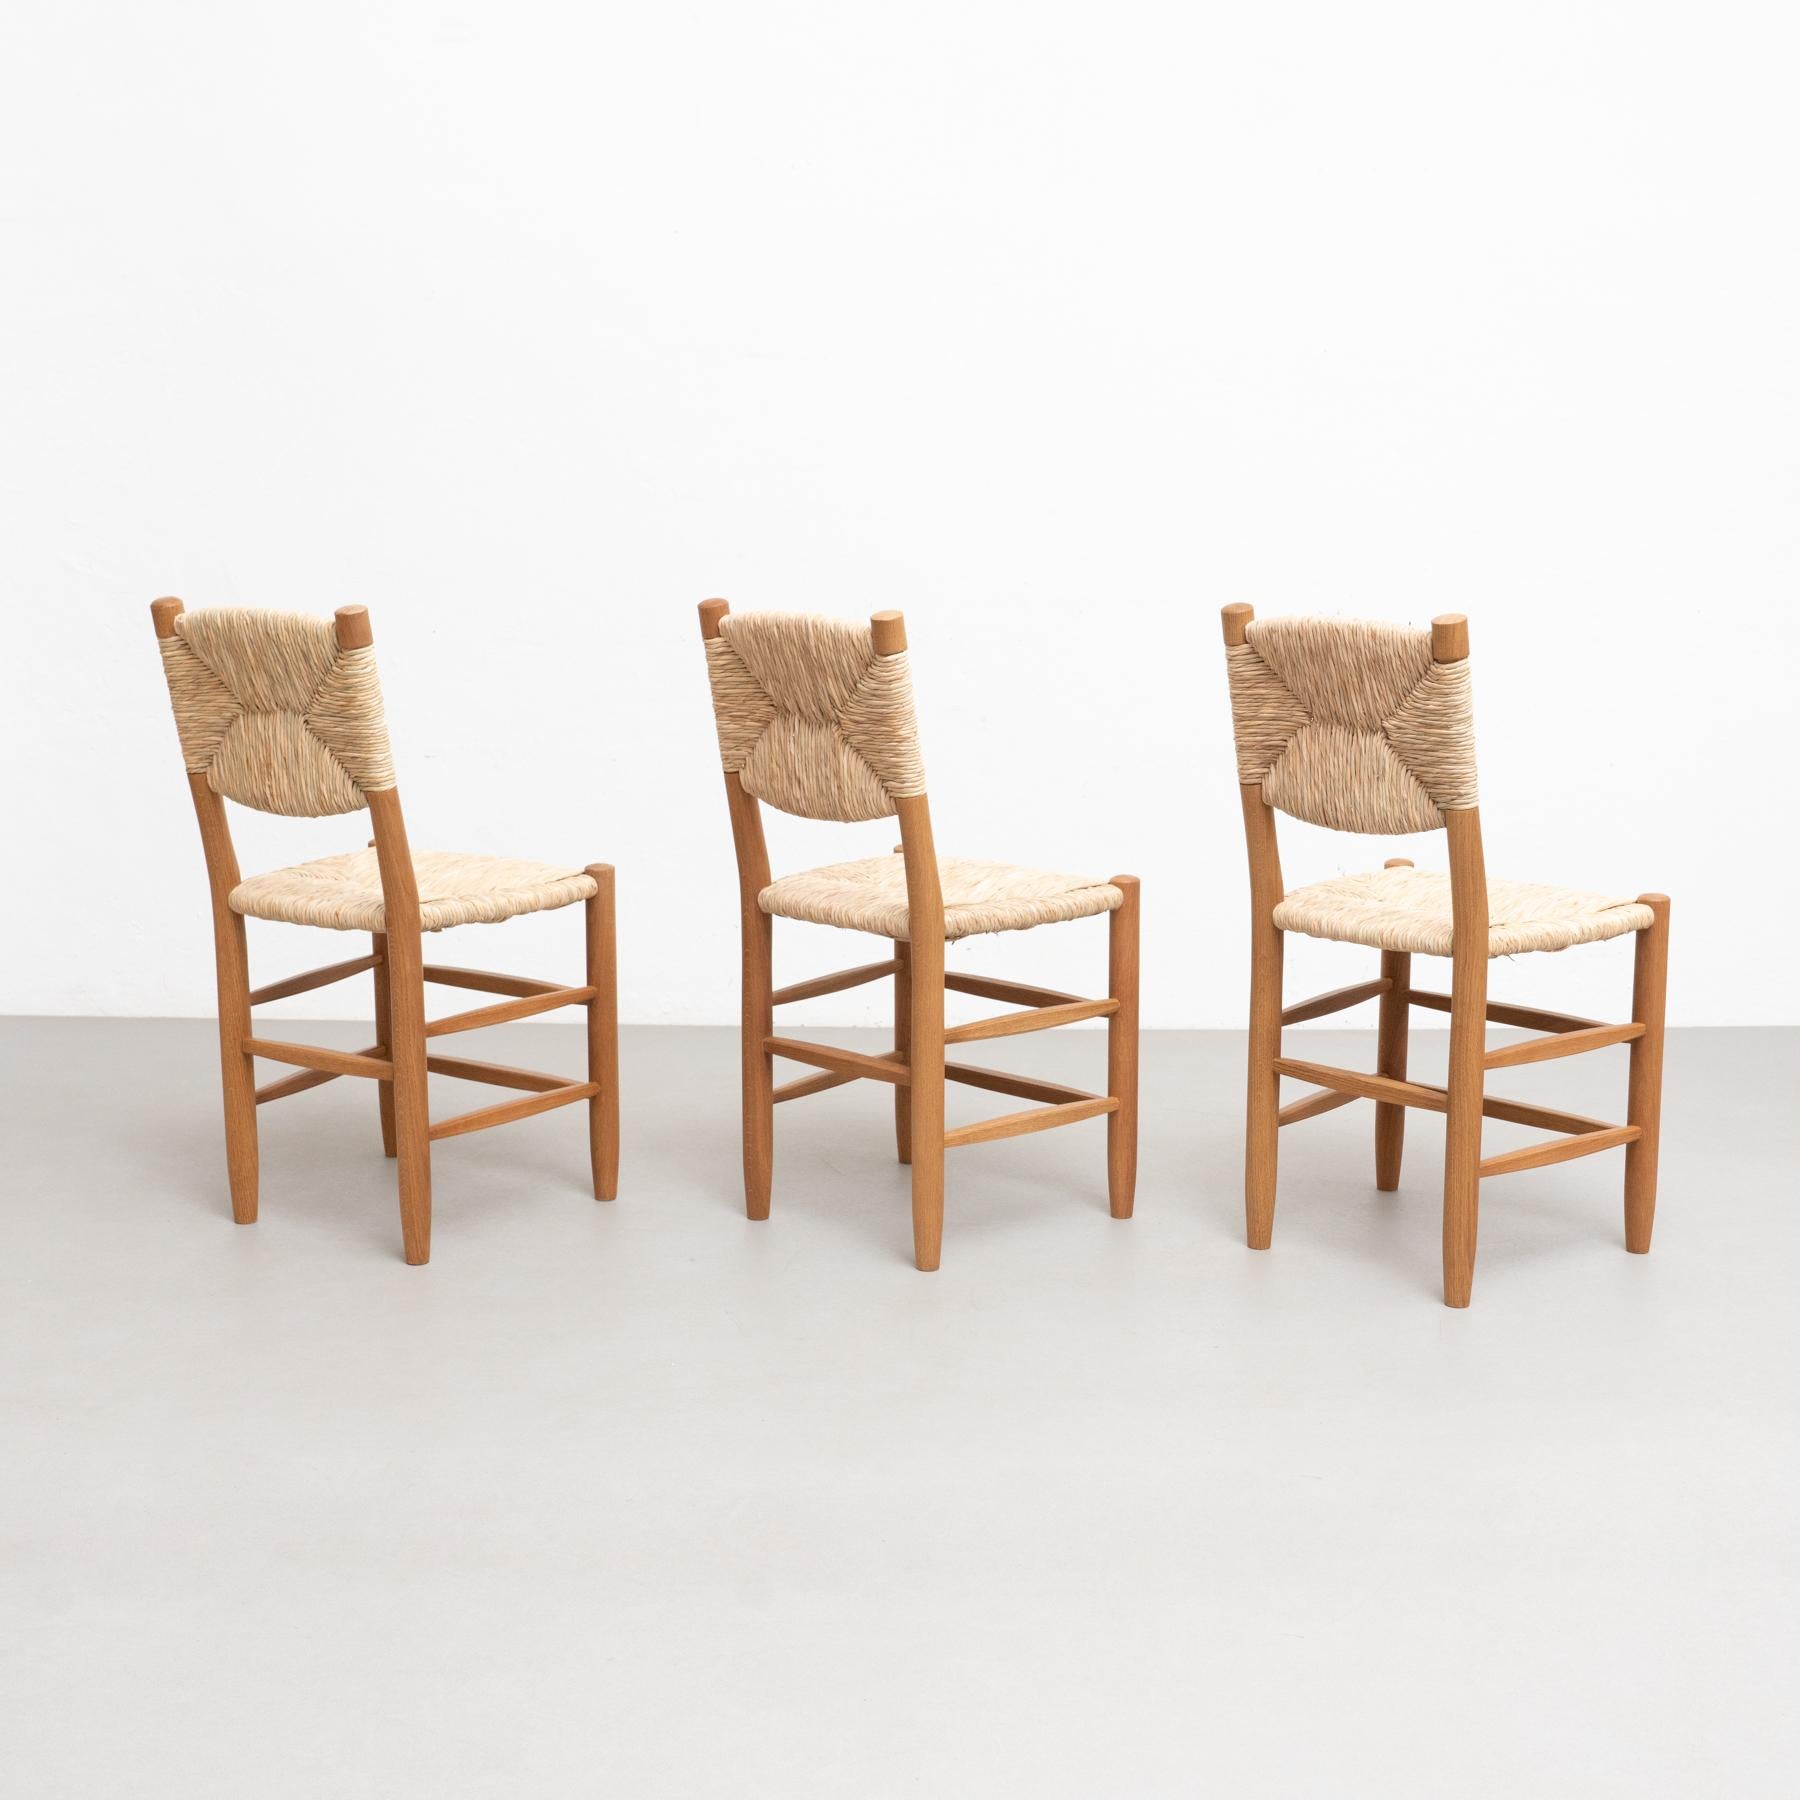 Set of 6 After Charlotte Perriand n.19 Chairs, Wood Rattan, Mid-Century Modern For Sale 7